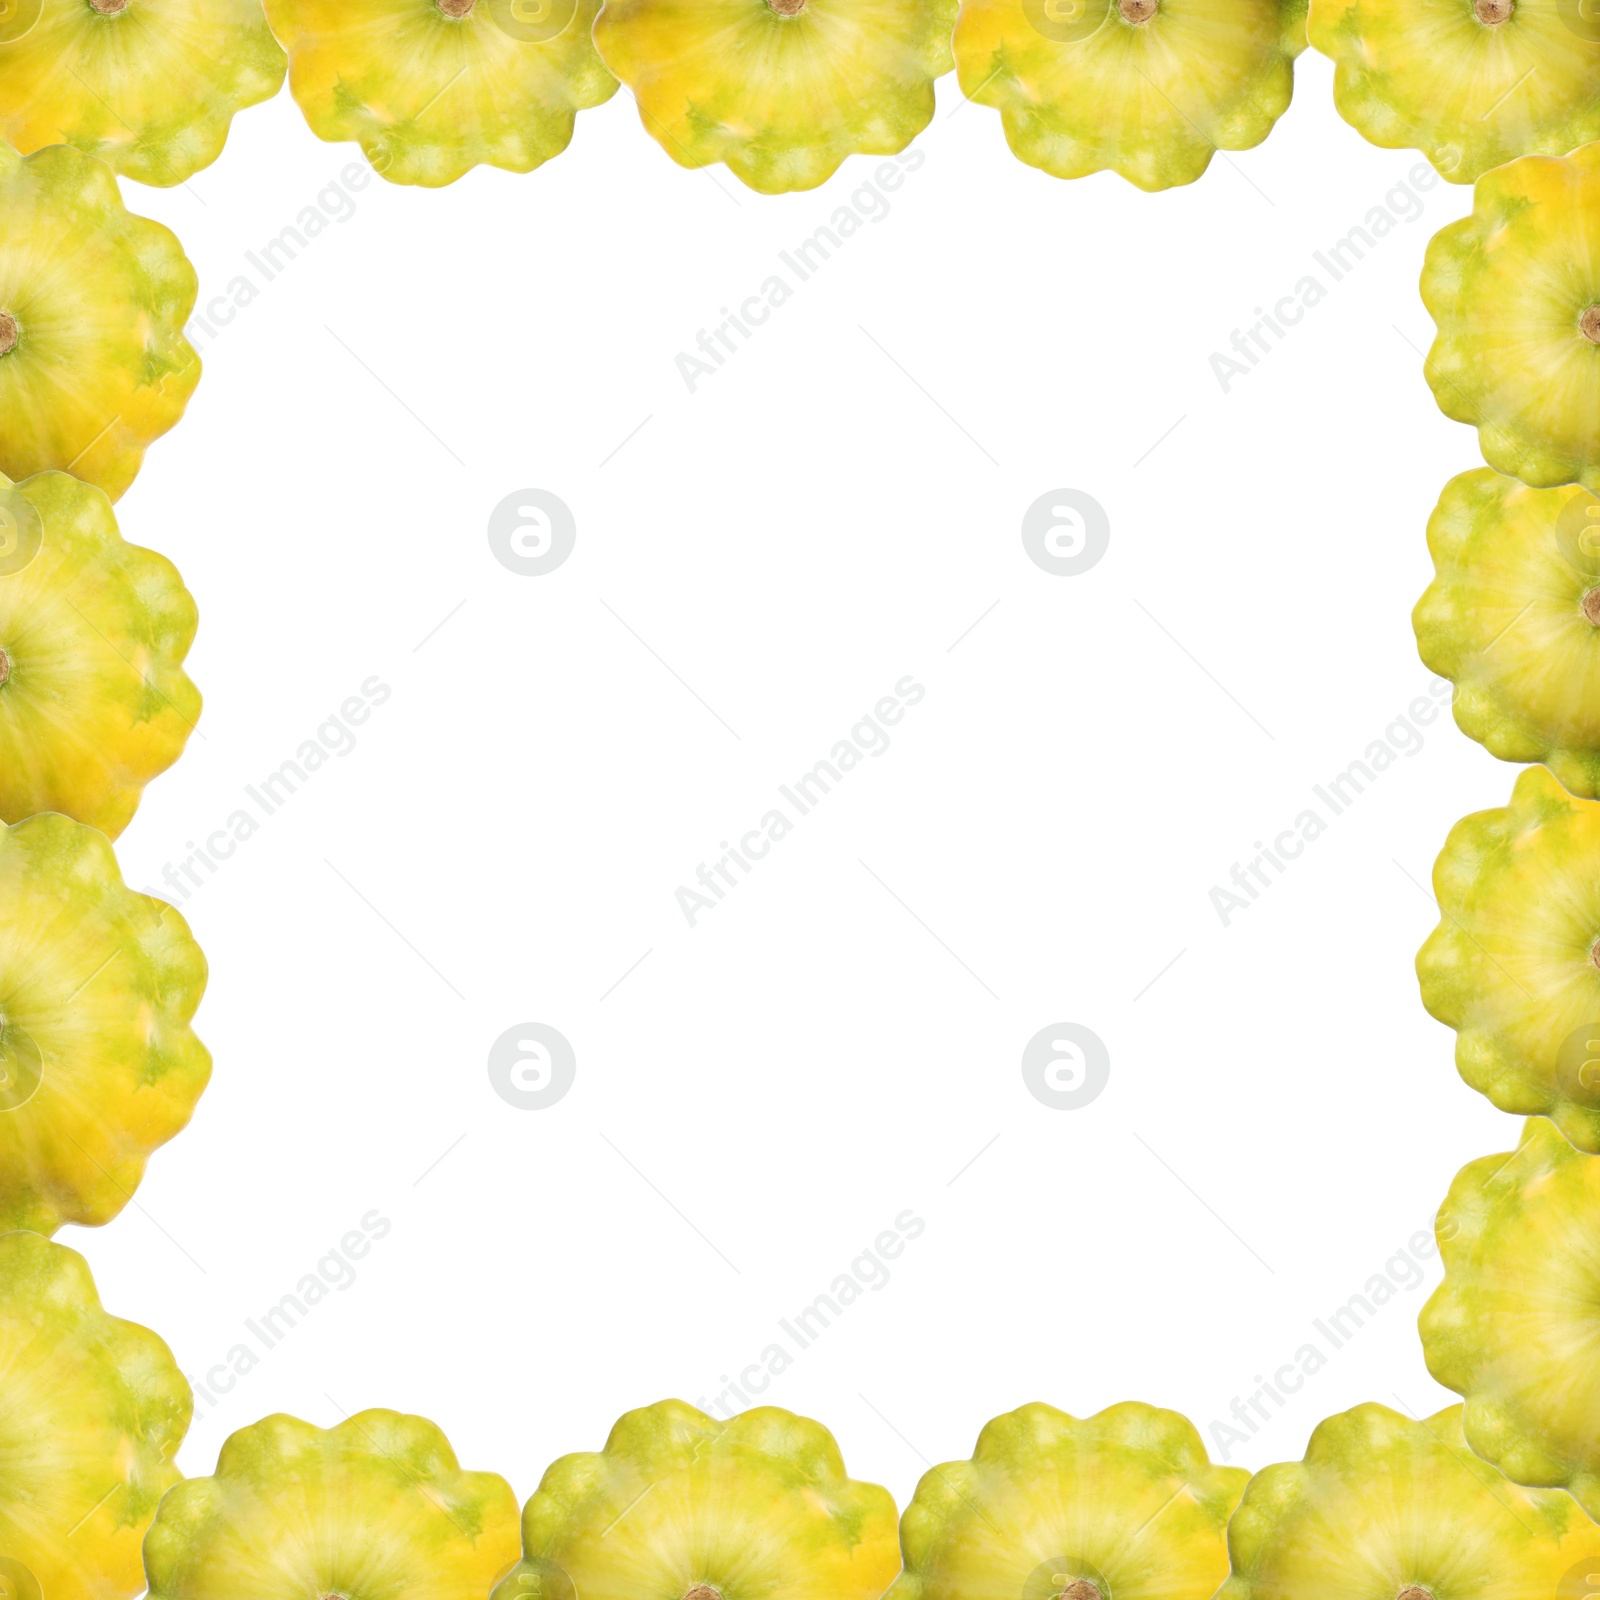 Image of Frame made of fresh ripe pattypan squashes on white background, top view